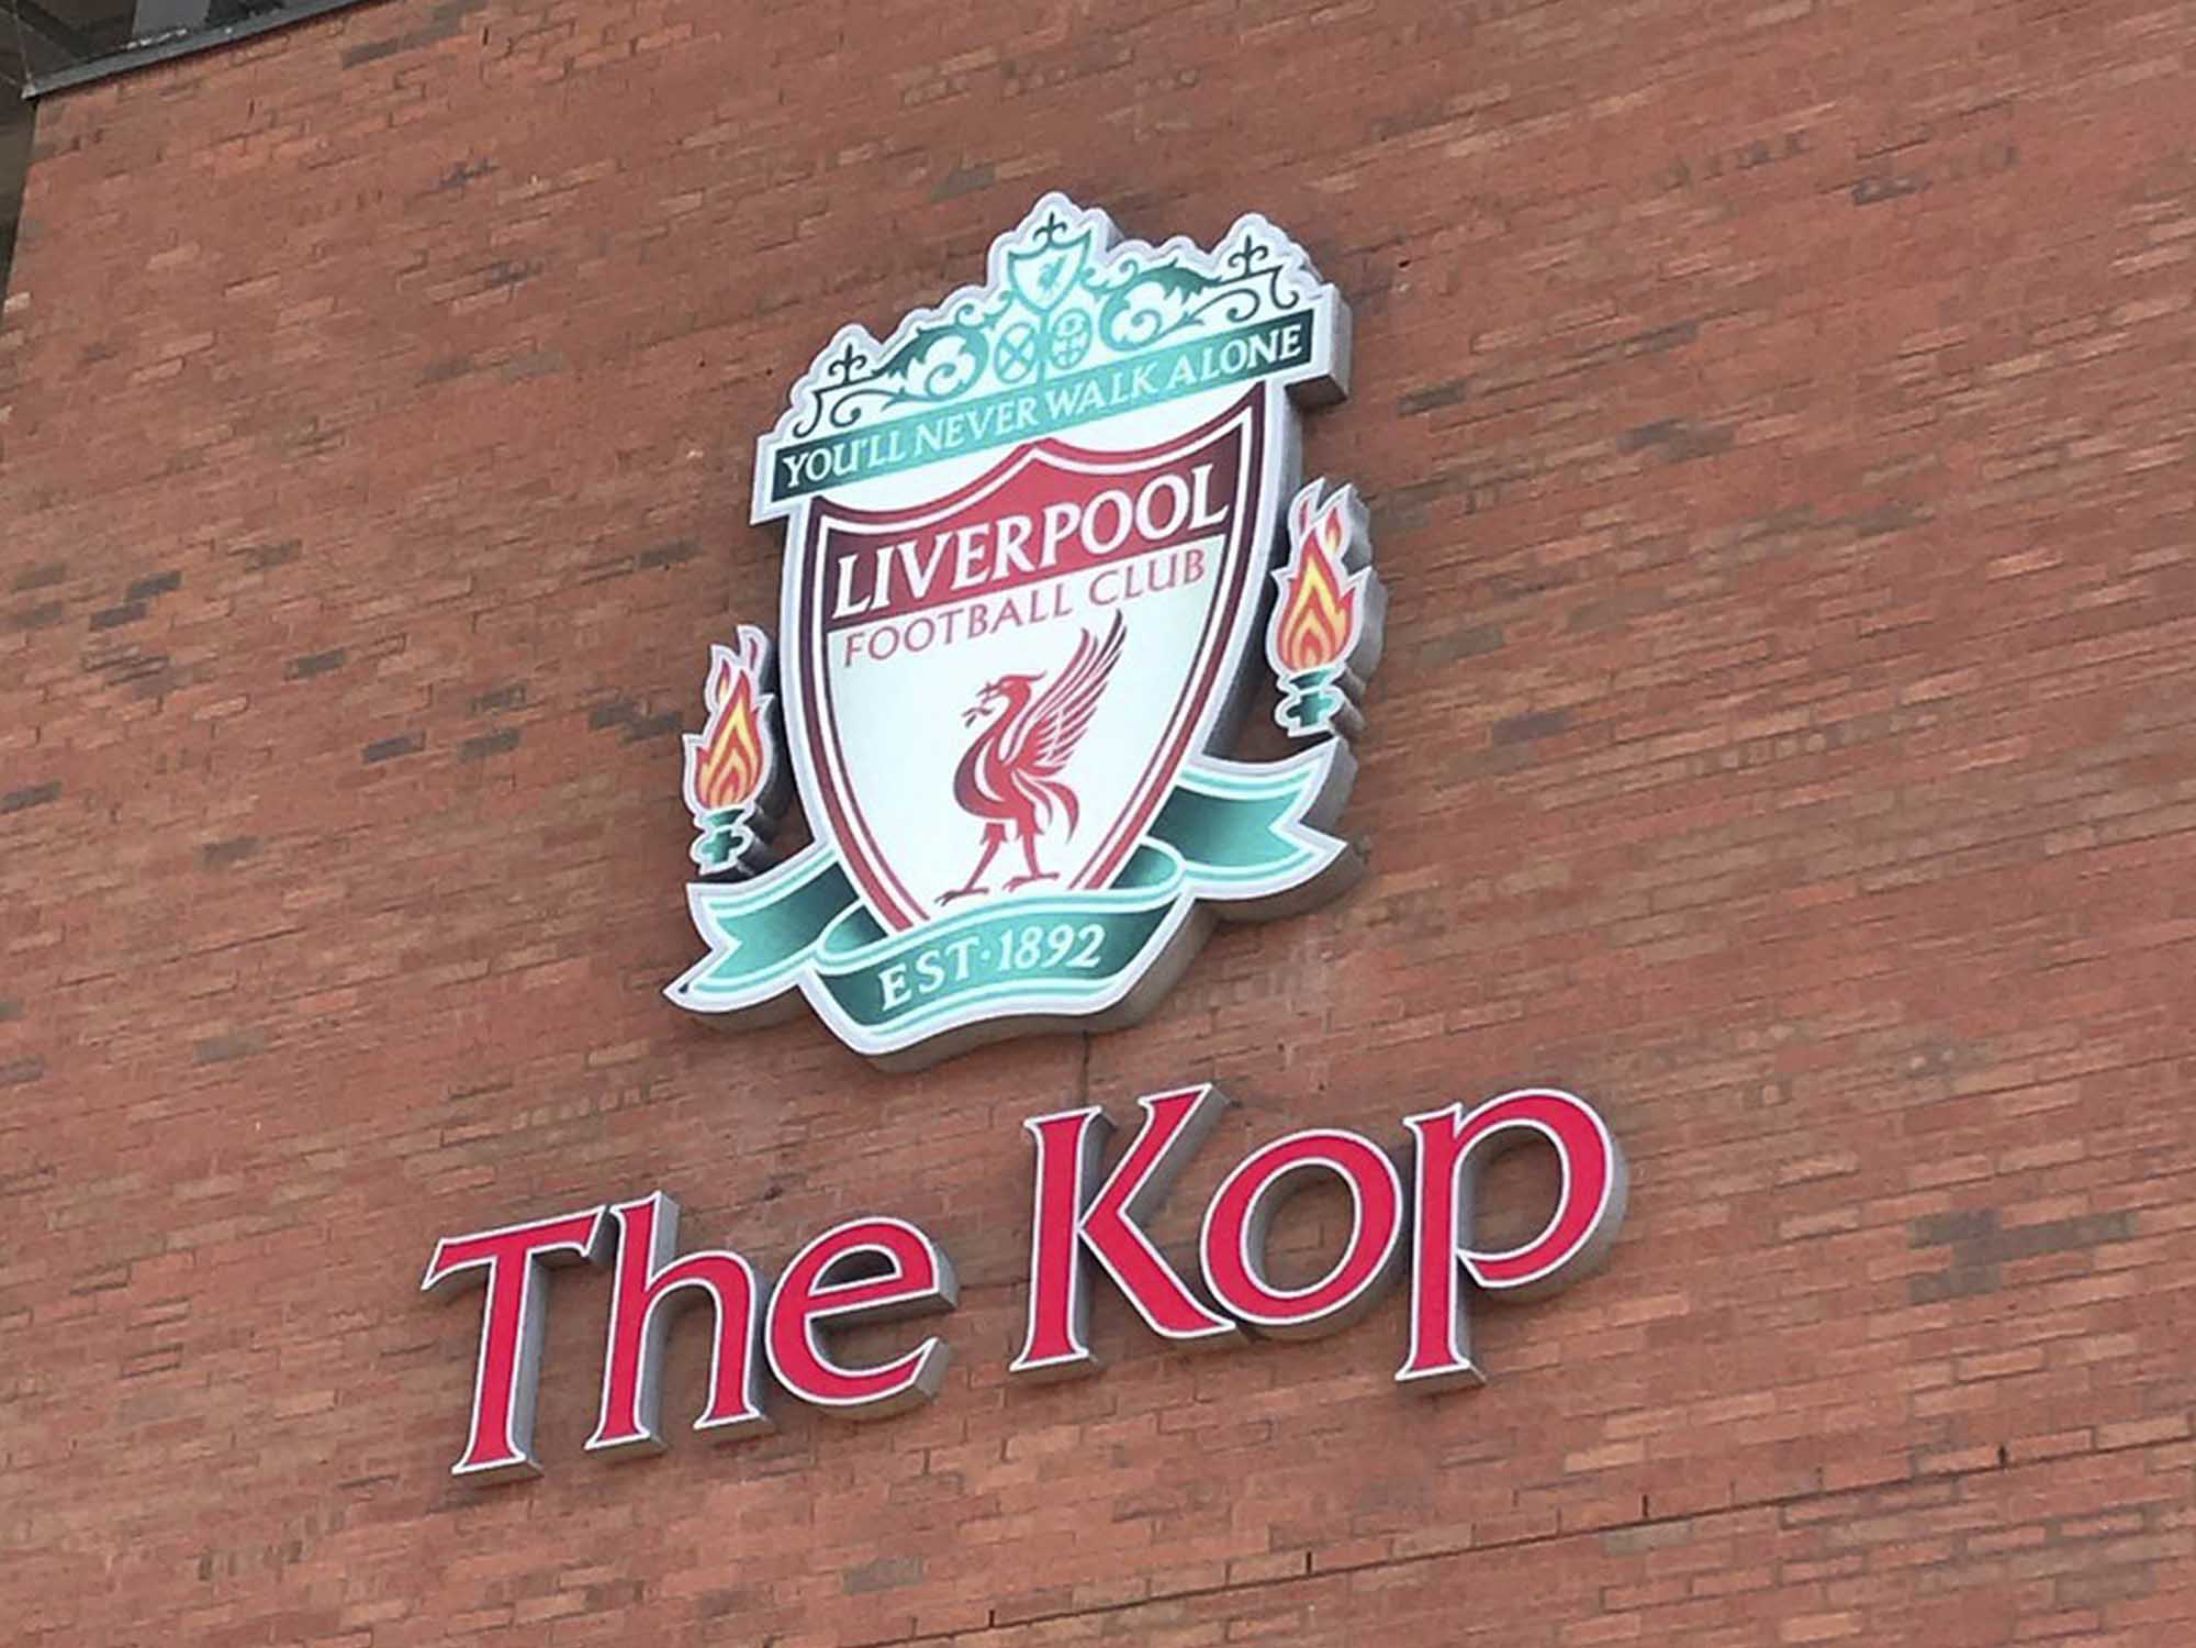 10 Large Christmas Party Venues in Liverpool - Liverpool Football Club